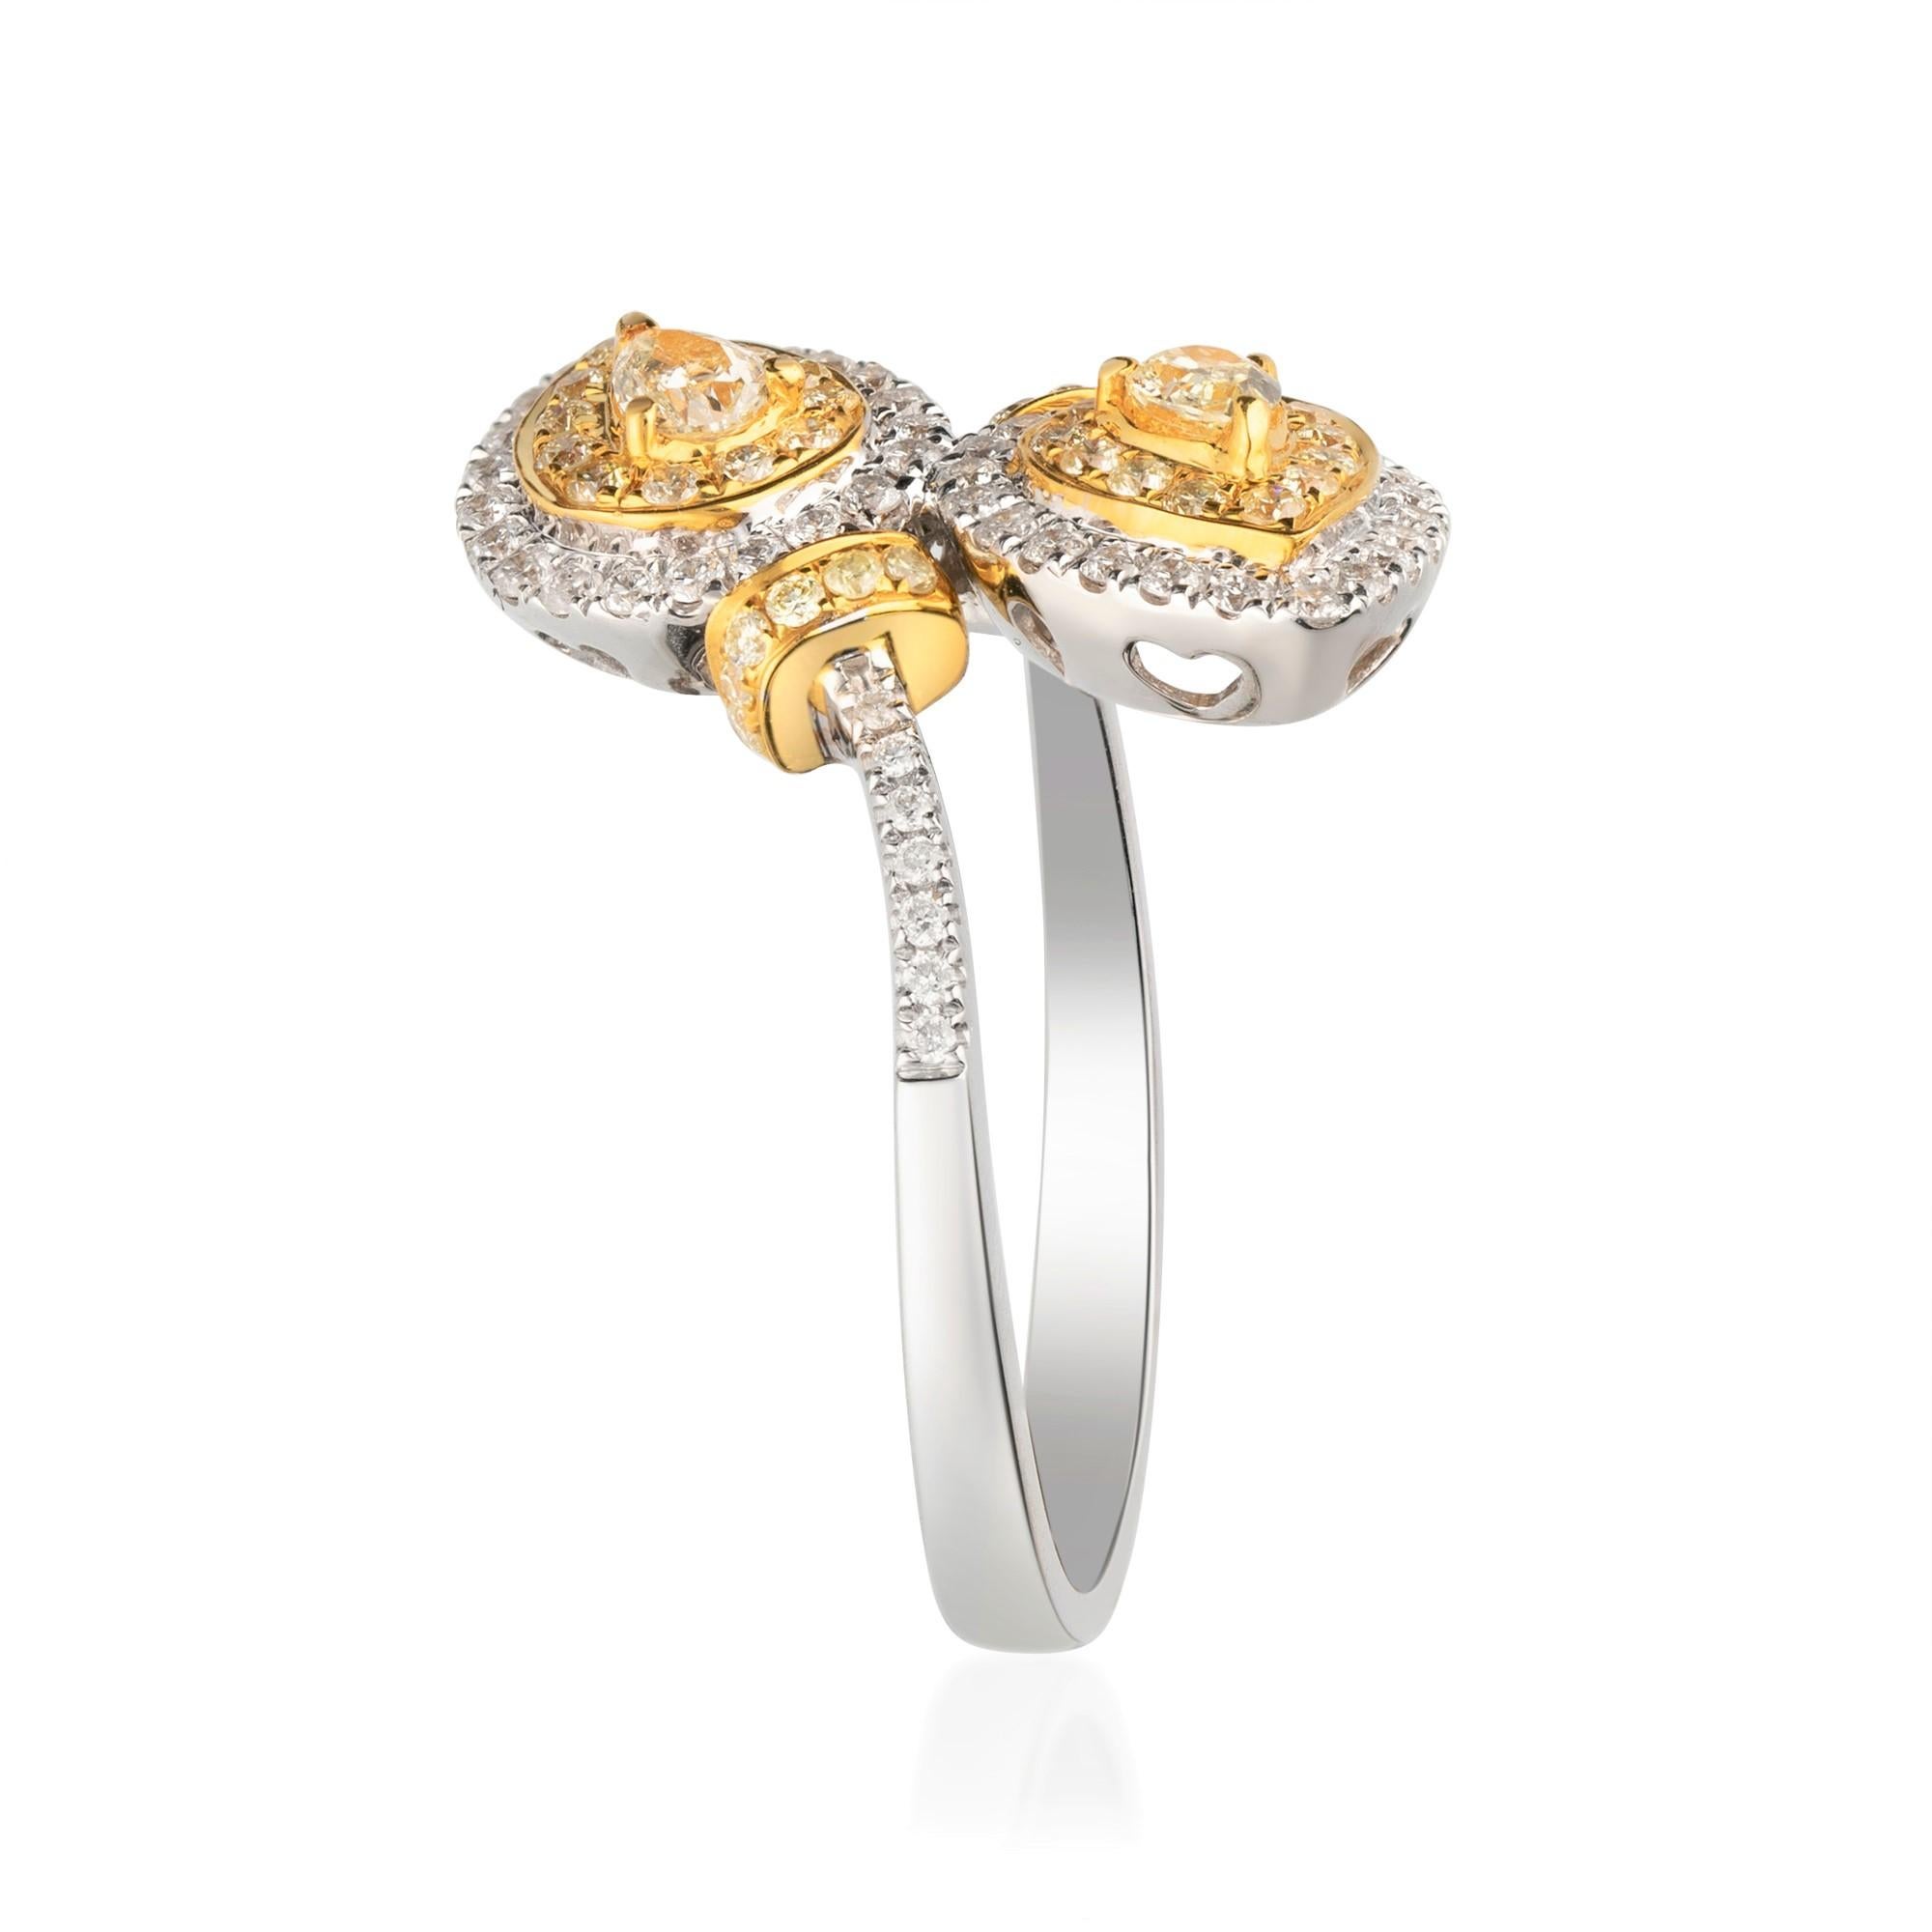 This beautiful Ring is crafted in 18-karat Two tone Gold and features an 2 Pcs  0.42 Carat Pear Cut Fancy Yellow Diamond surrounded with  36 Pcs Fancy Yellow Diamonds 0.23 Carats and 58 Pcs Round -cut White Diamonds 0.35 Carat in GH-SI quality.  It